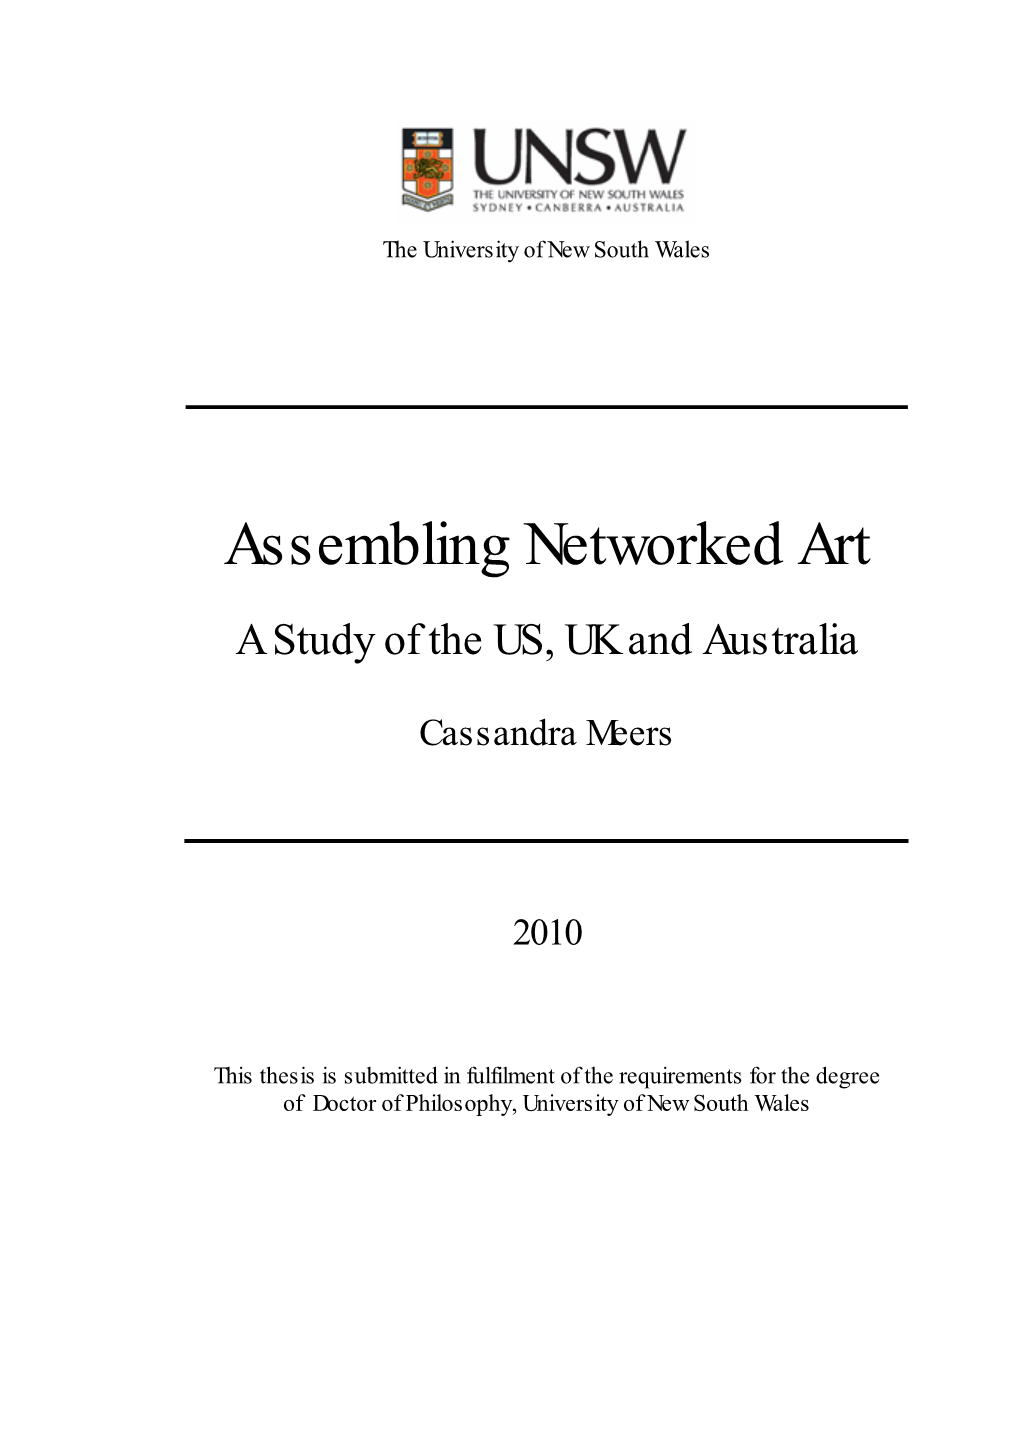 Assembling Networked Art a Study of the US, UK and Australia